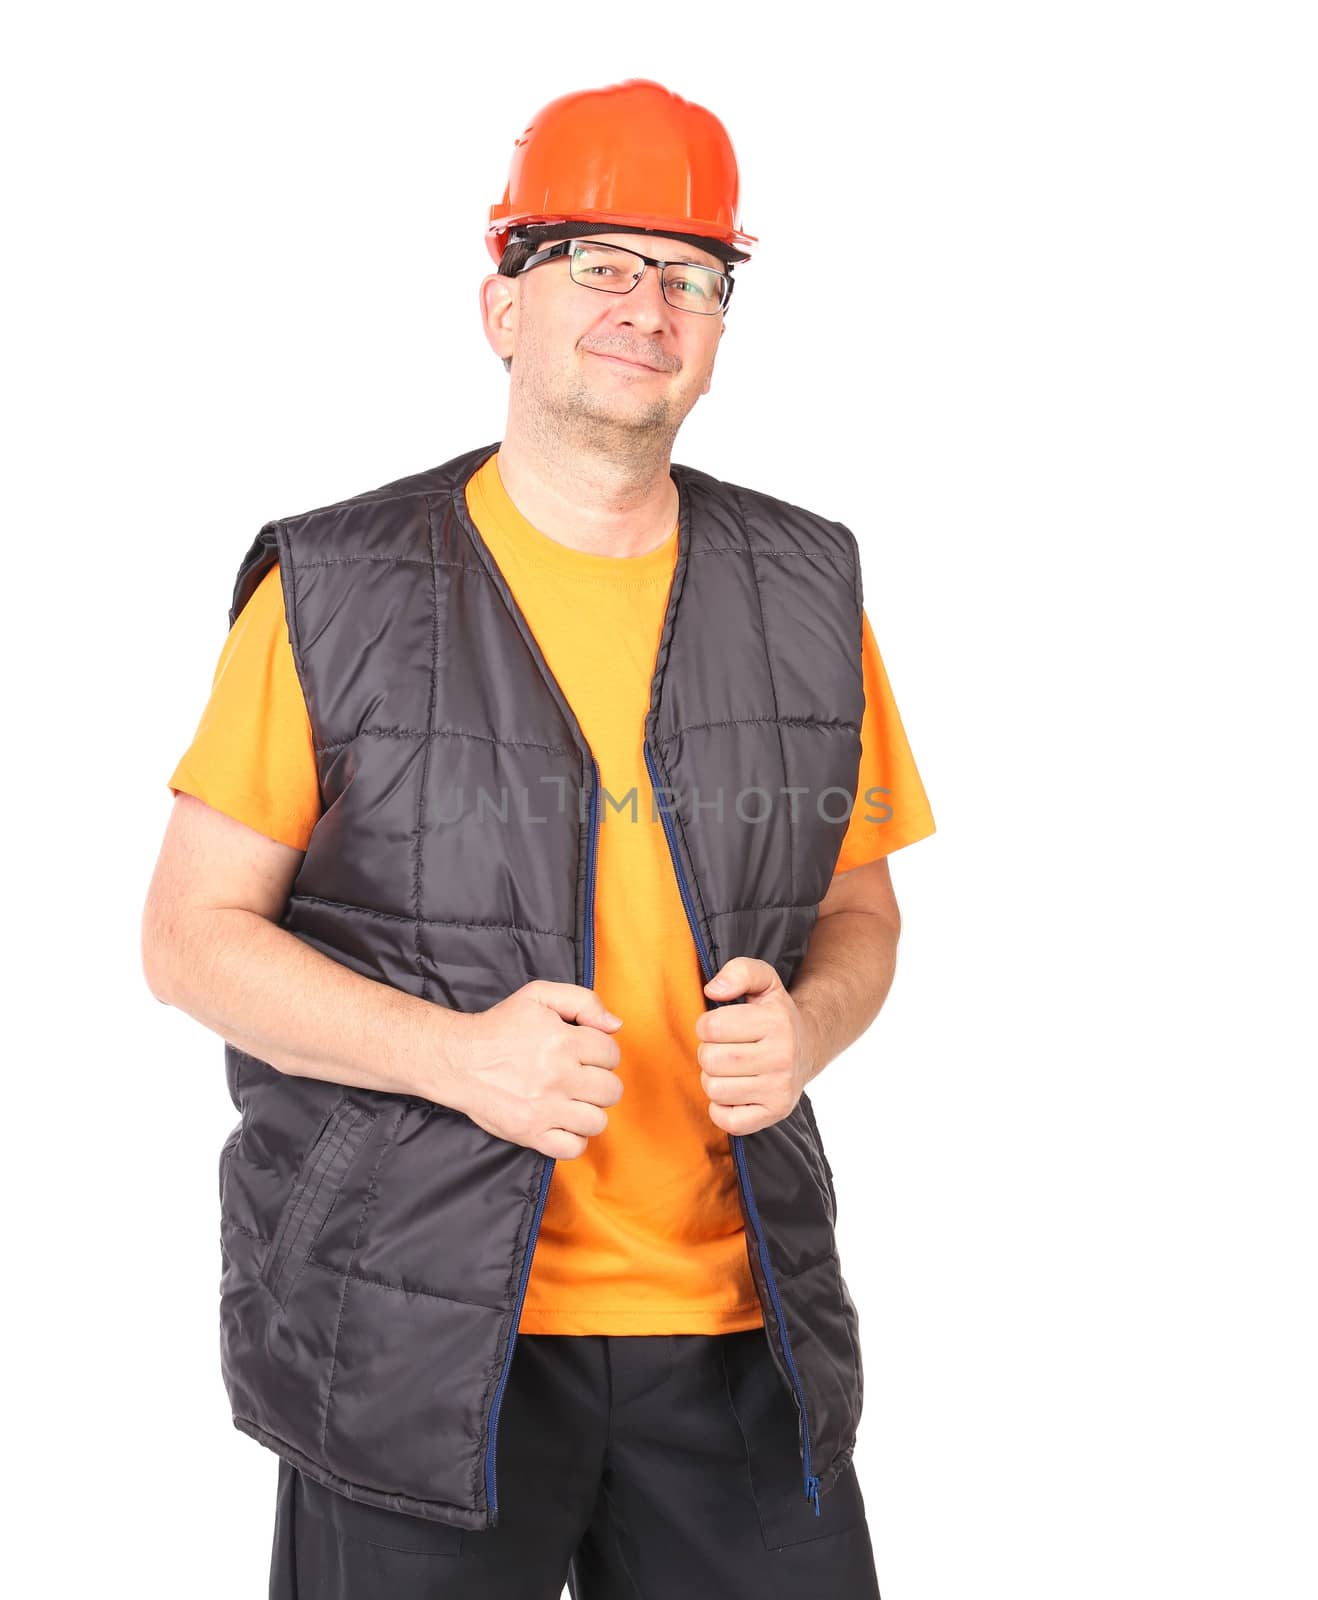 Foreman in helmet and vest. Isolated on a white background.